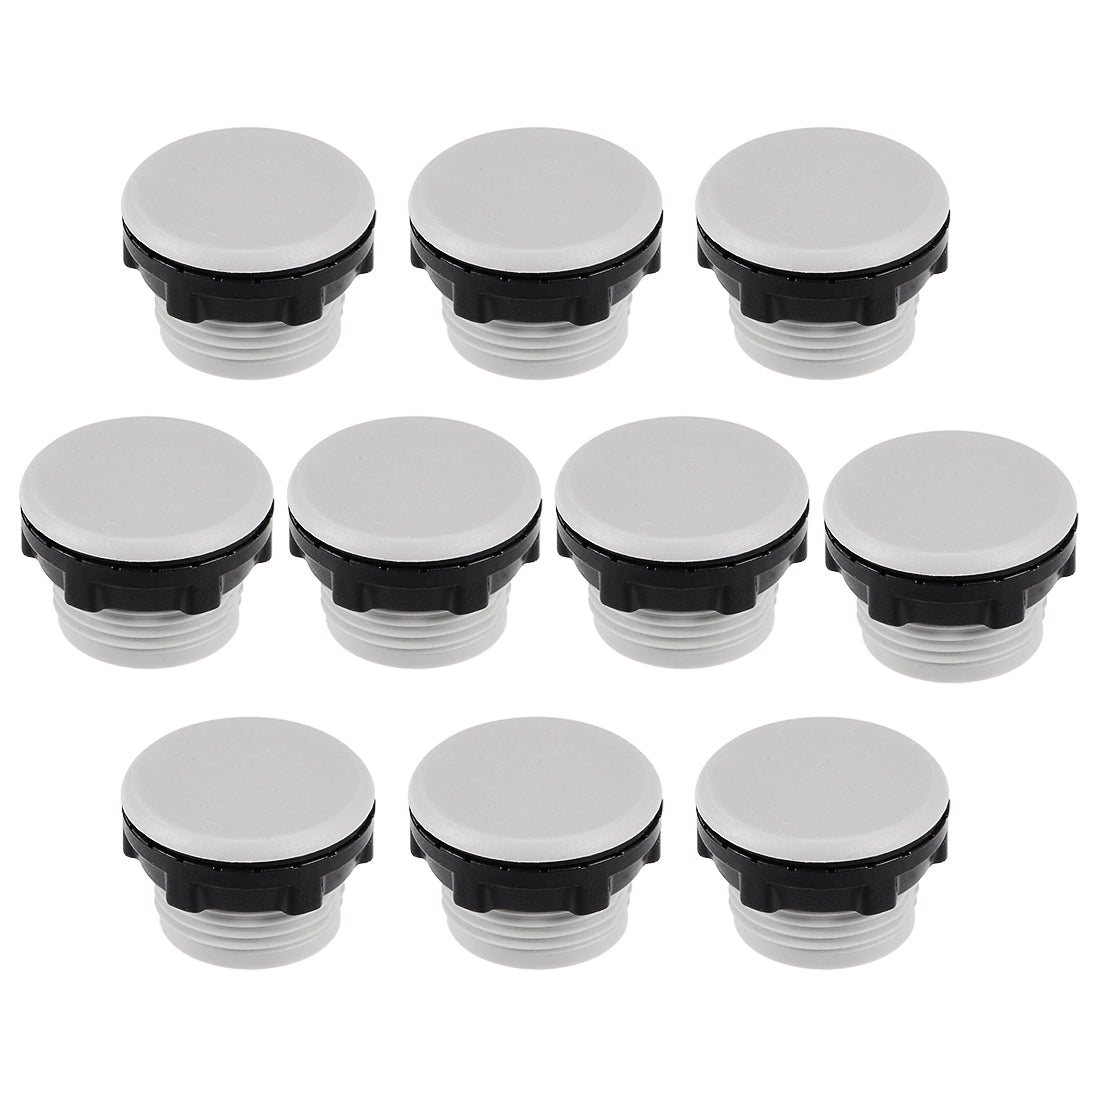 uxcell Uxcell 10Pcs 22mm Black Gray Plastic Push Button Switch Hole Panel Plug